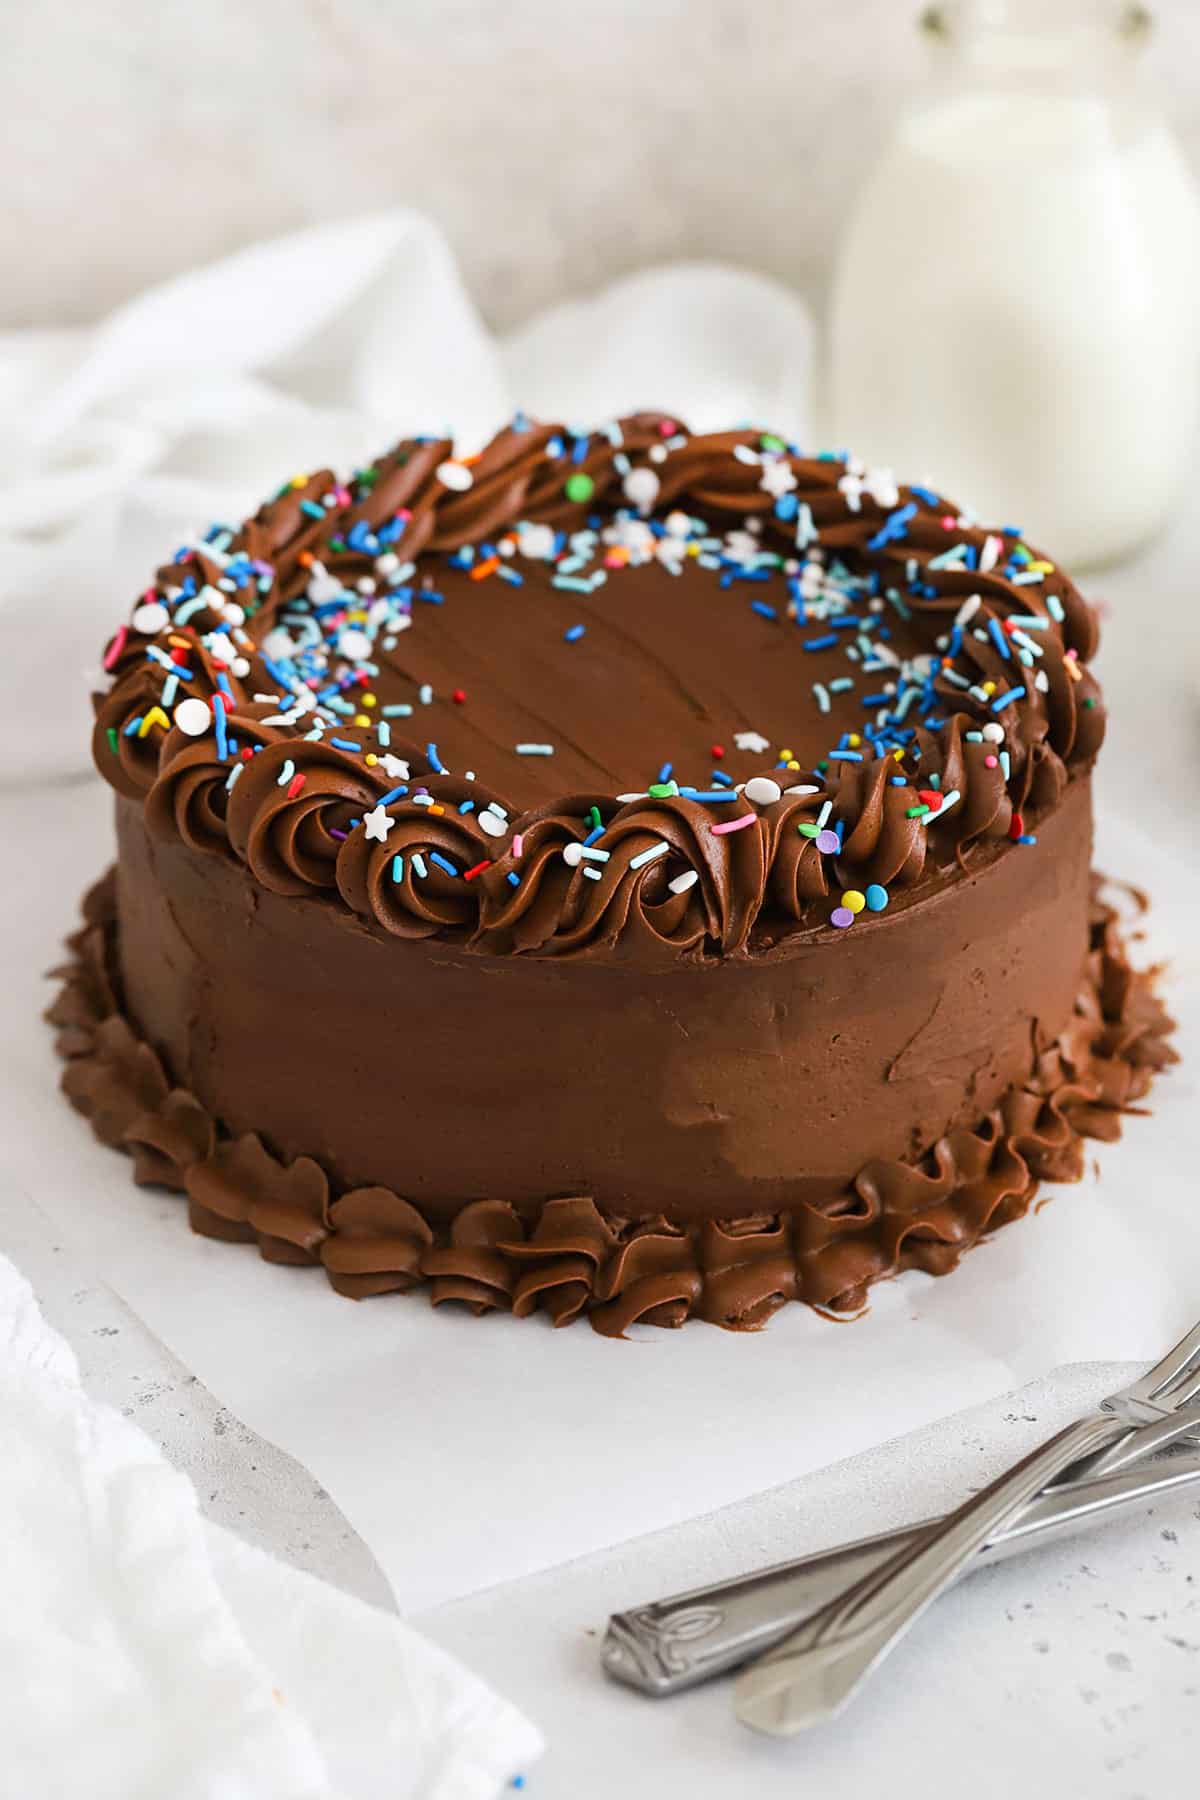 gluten-free birthday cake with chocolate frosting and sprinkles